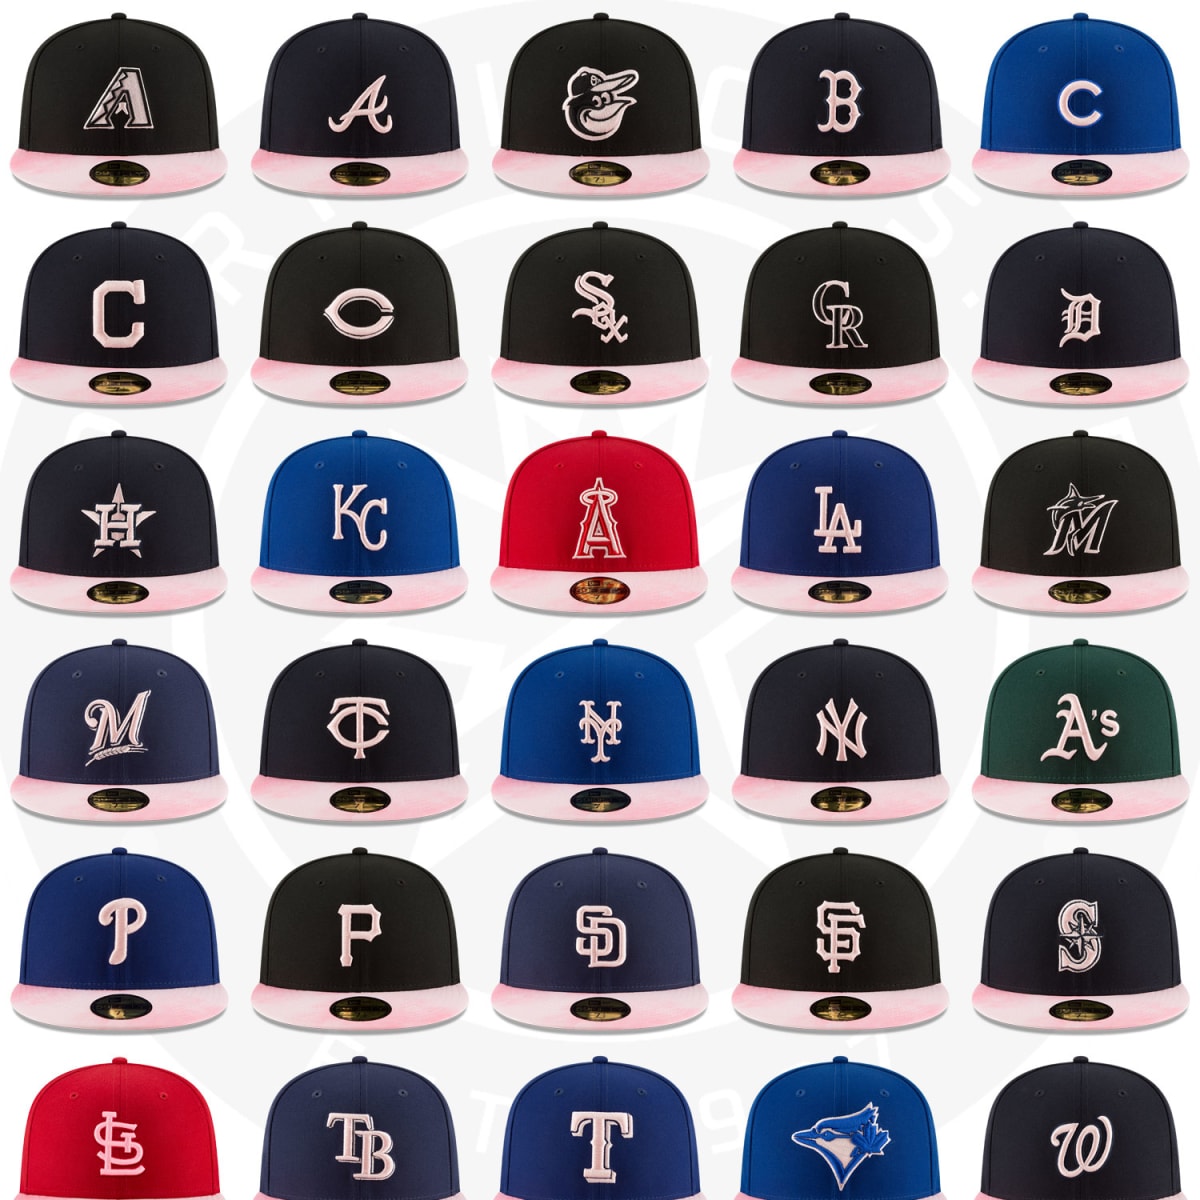 MLB Unveils 2019 Holiday, All-Star Caps and Uniforms – SportsLogos